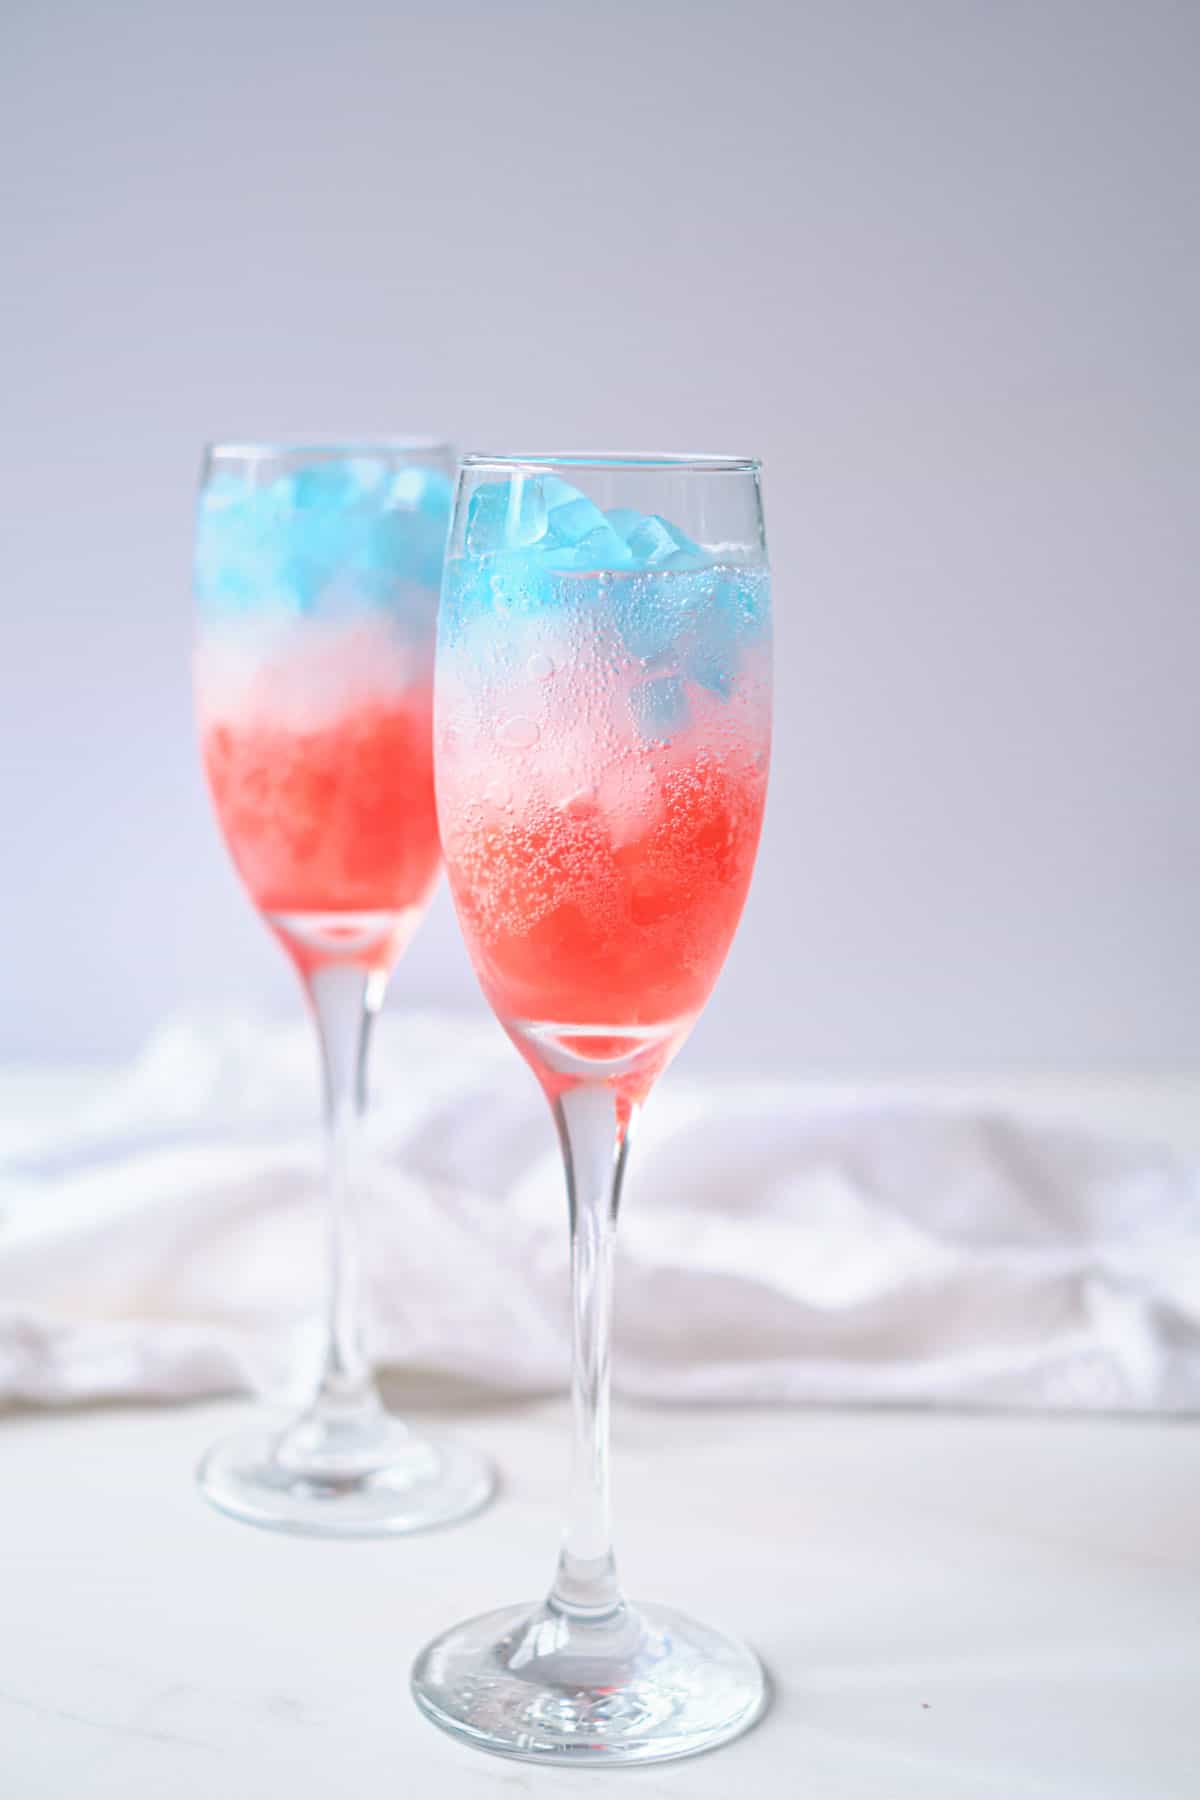 Red, white and blue ice cubes in a glass with some sprite